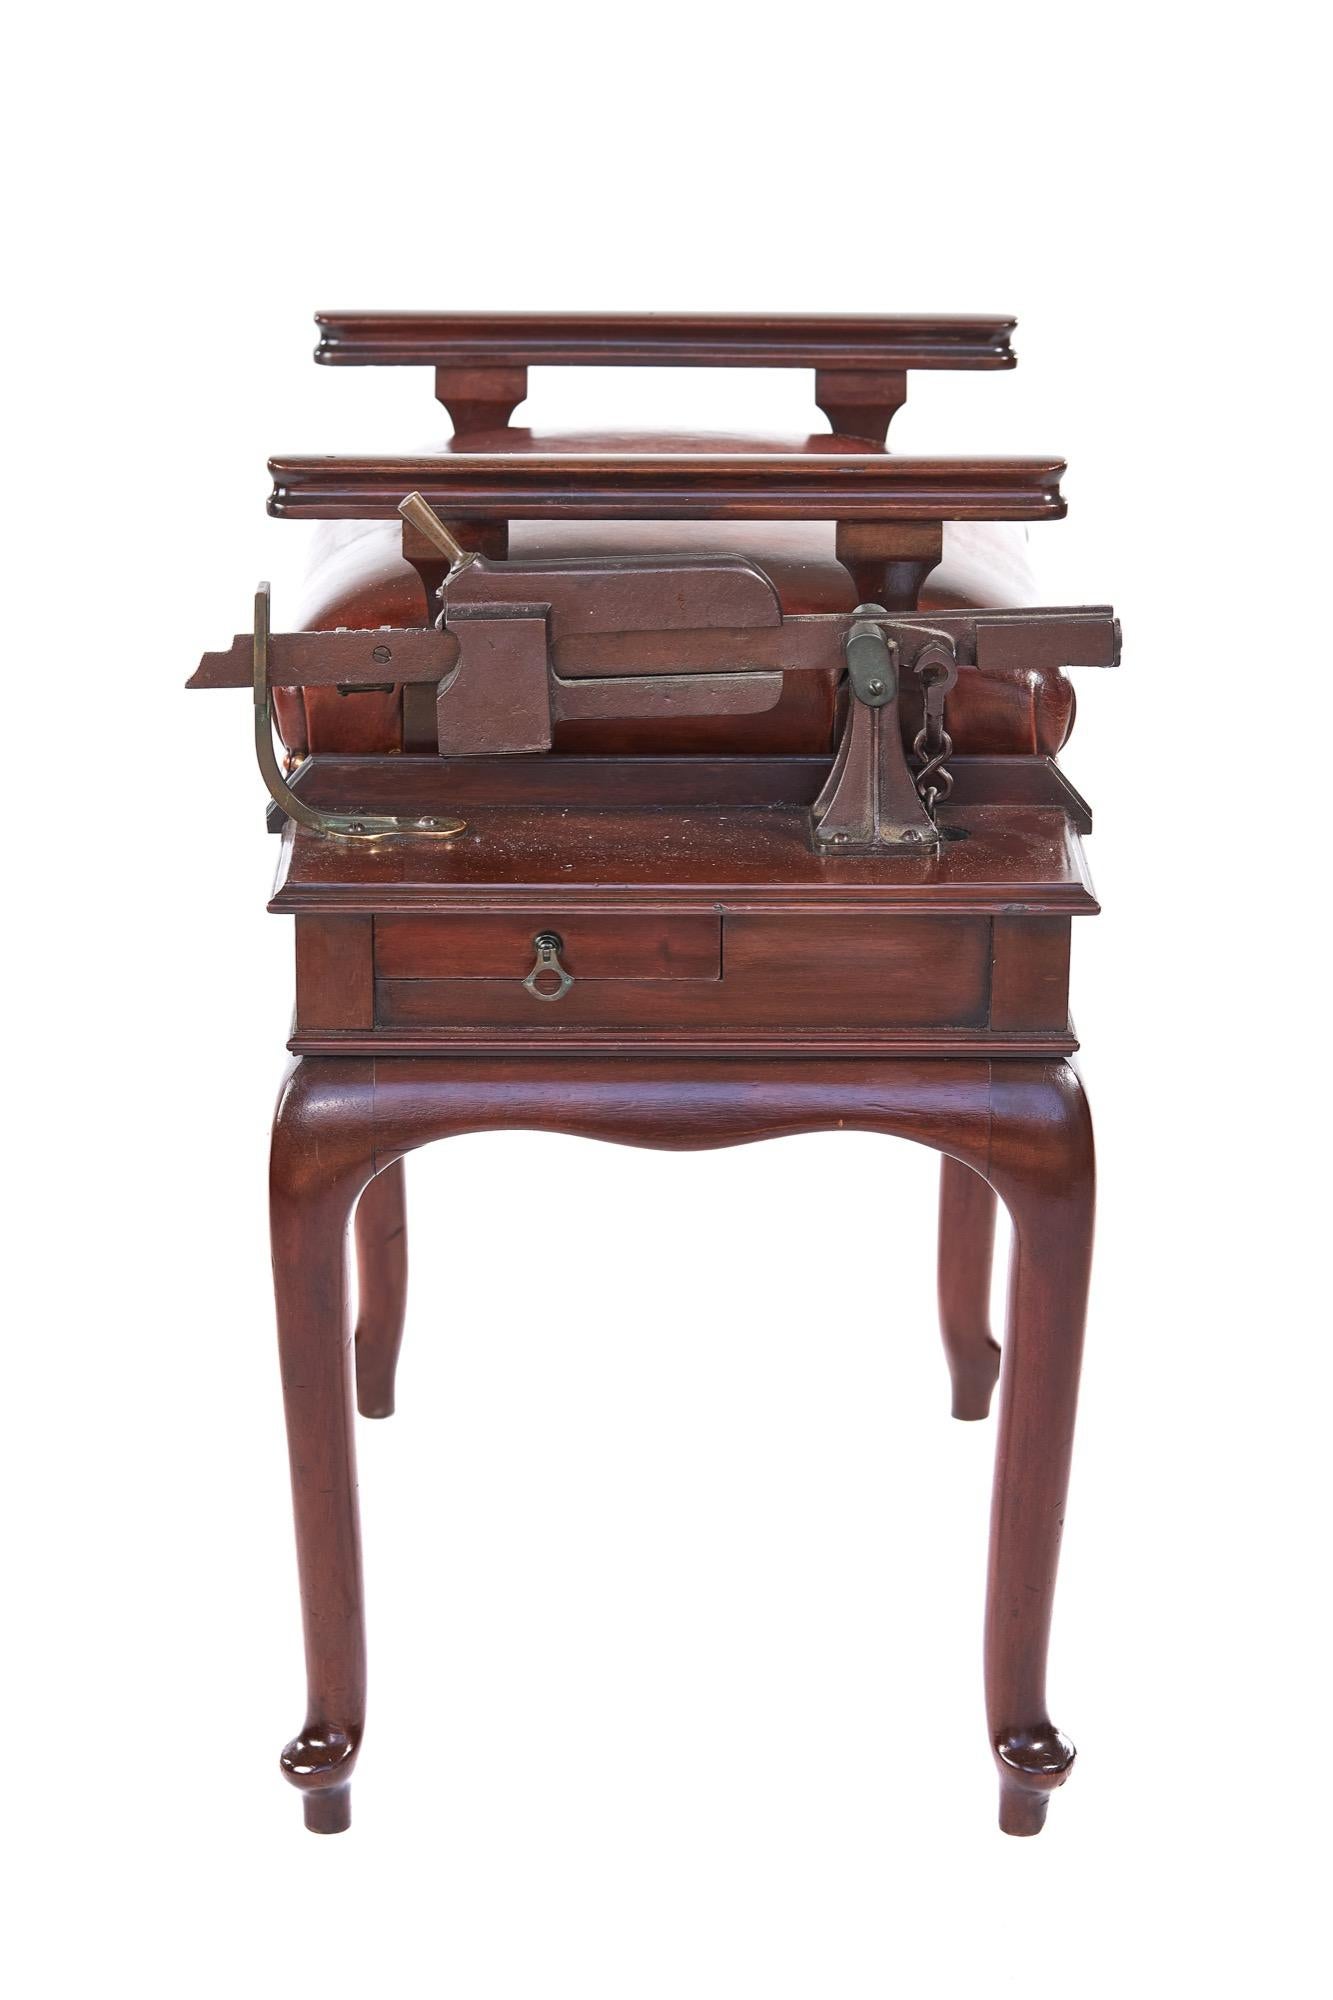 Early 20th Century Antique Edwardian Mahogany and Leather Seat Jockey Scales